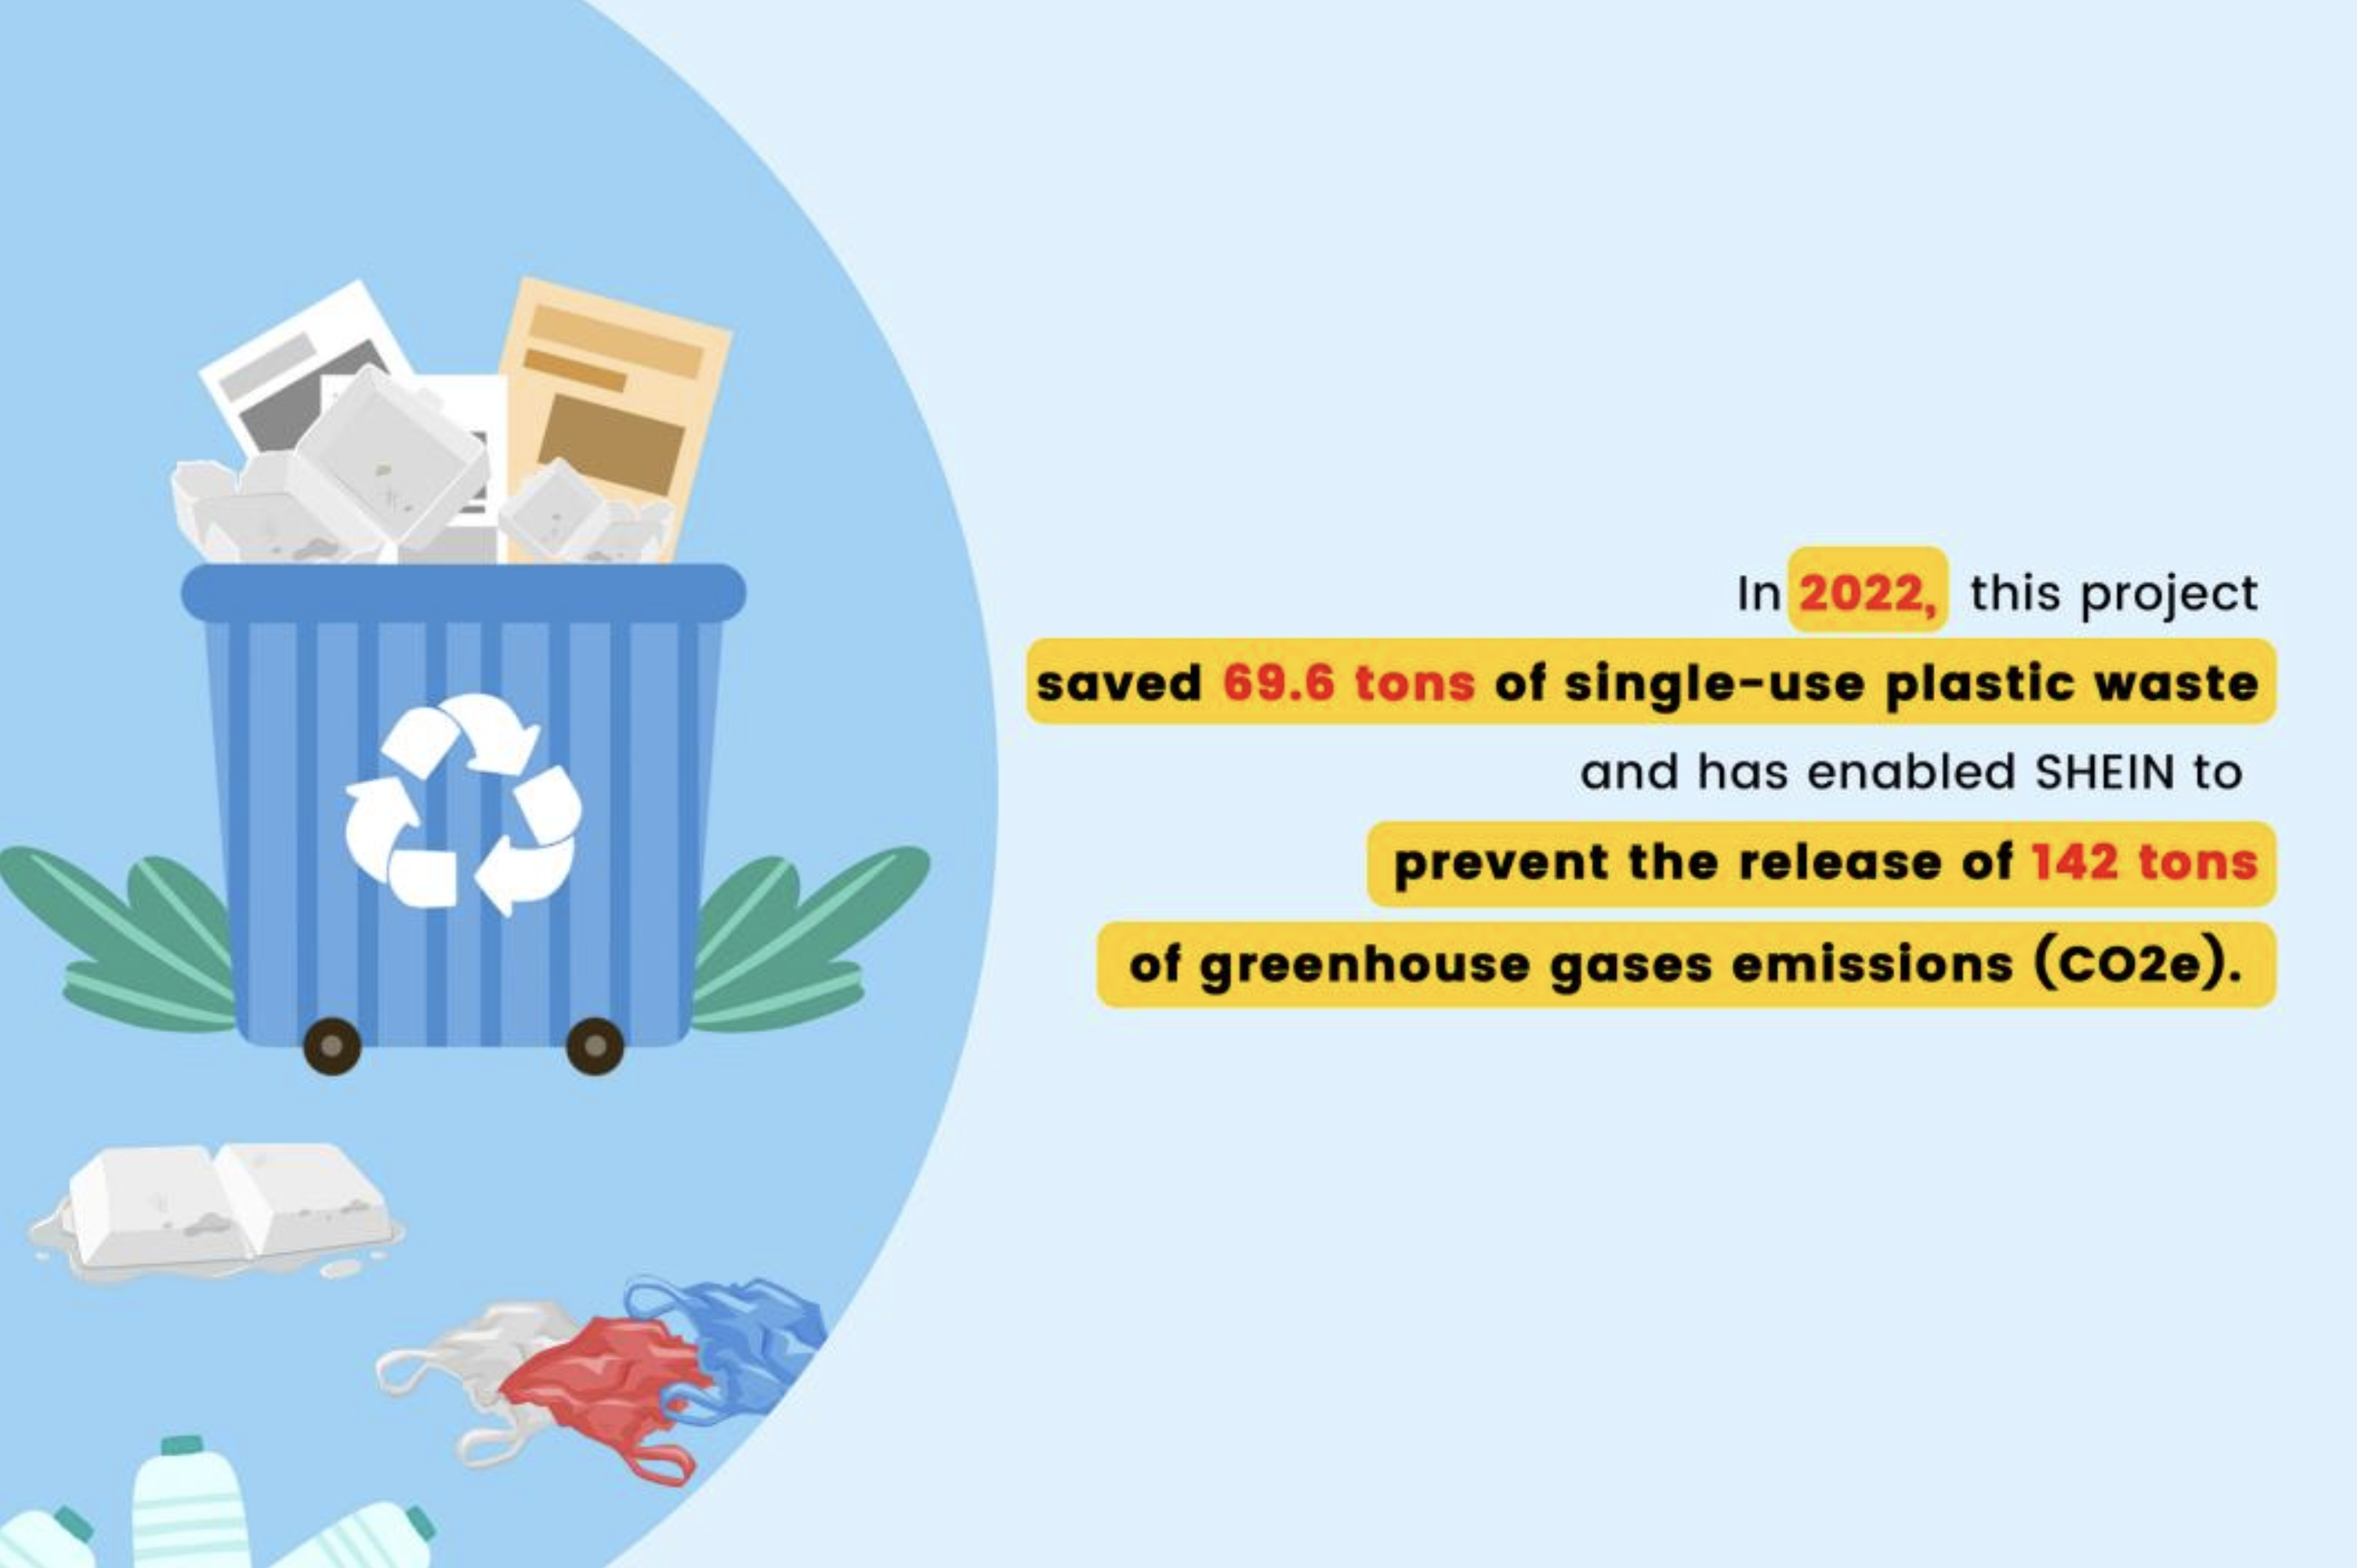 Graphic with the text "In 2022, this project saved 69.6 tons of single-use plastic waste and has enabled SHEIN to prevent the release of 142 tons of greenhouse gases emissions (CO2e)